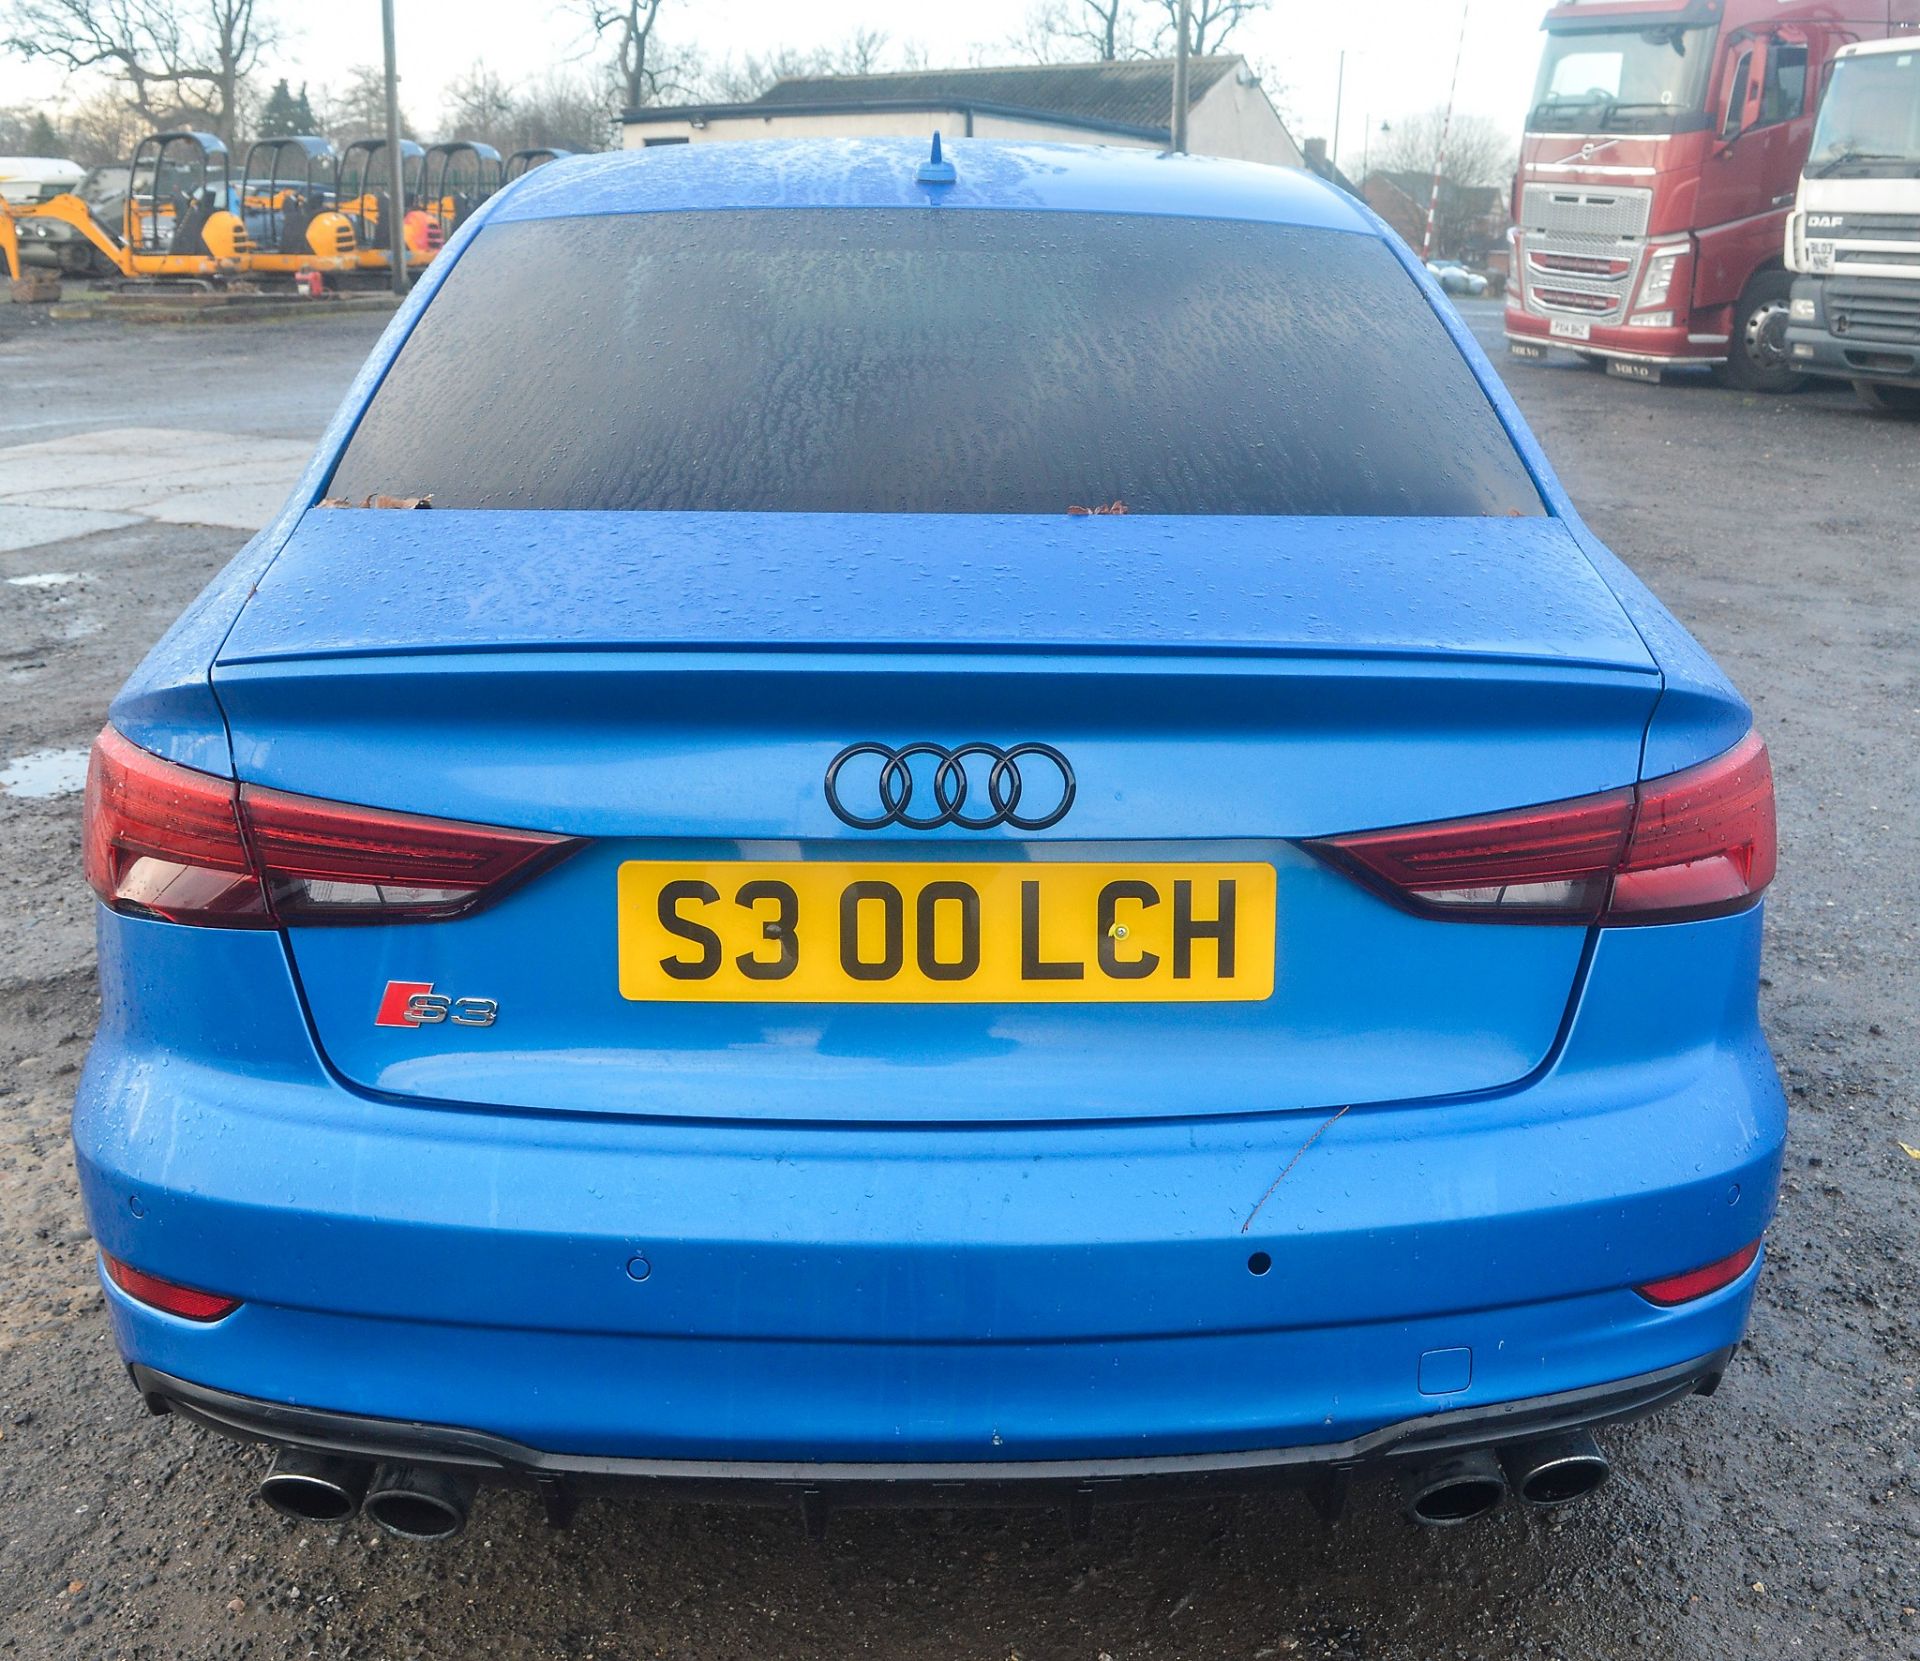 Audi S3 TFSi Quattro Black Edition 4 door saloon car Registration Number: S300 LCH Date of - Image 7 of 12